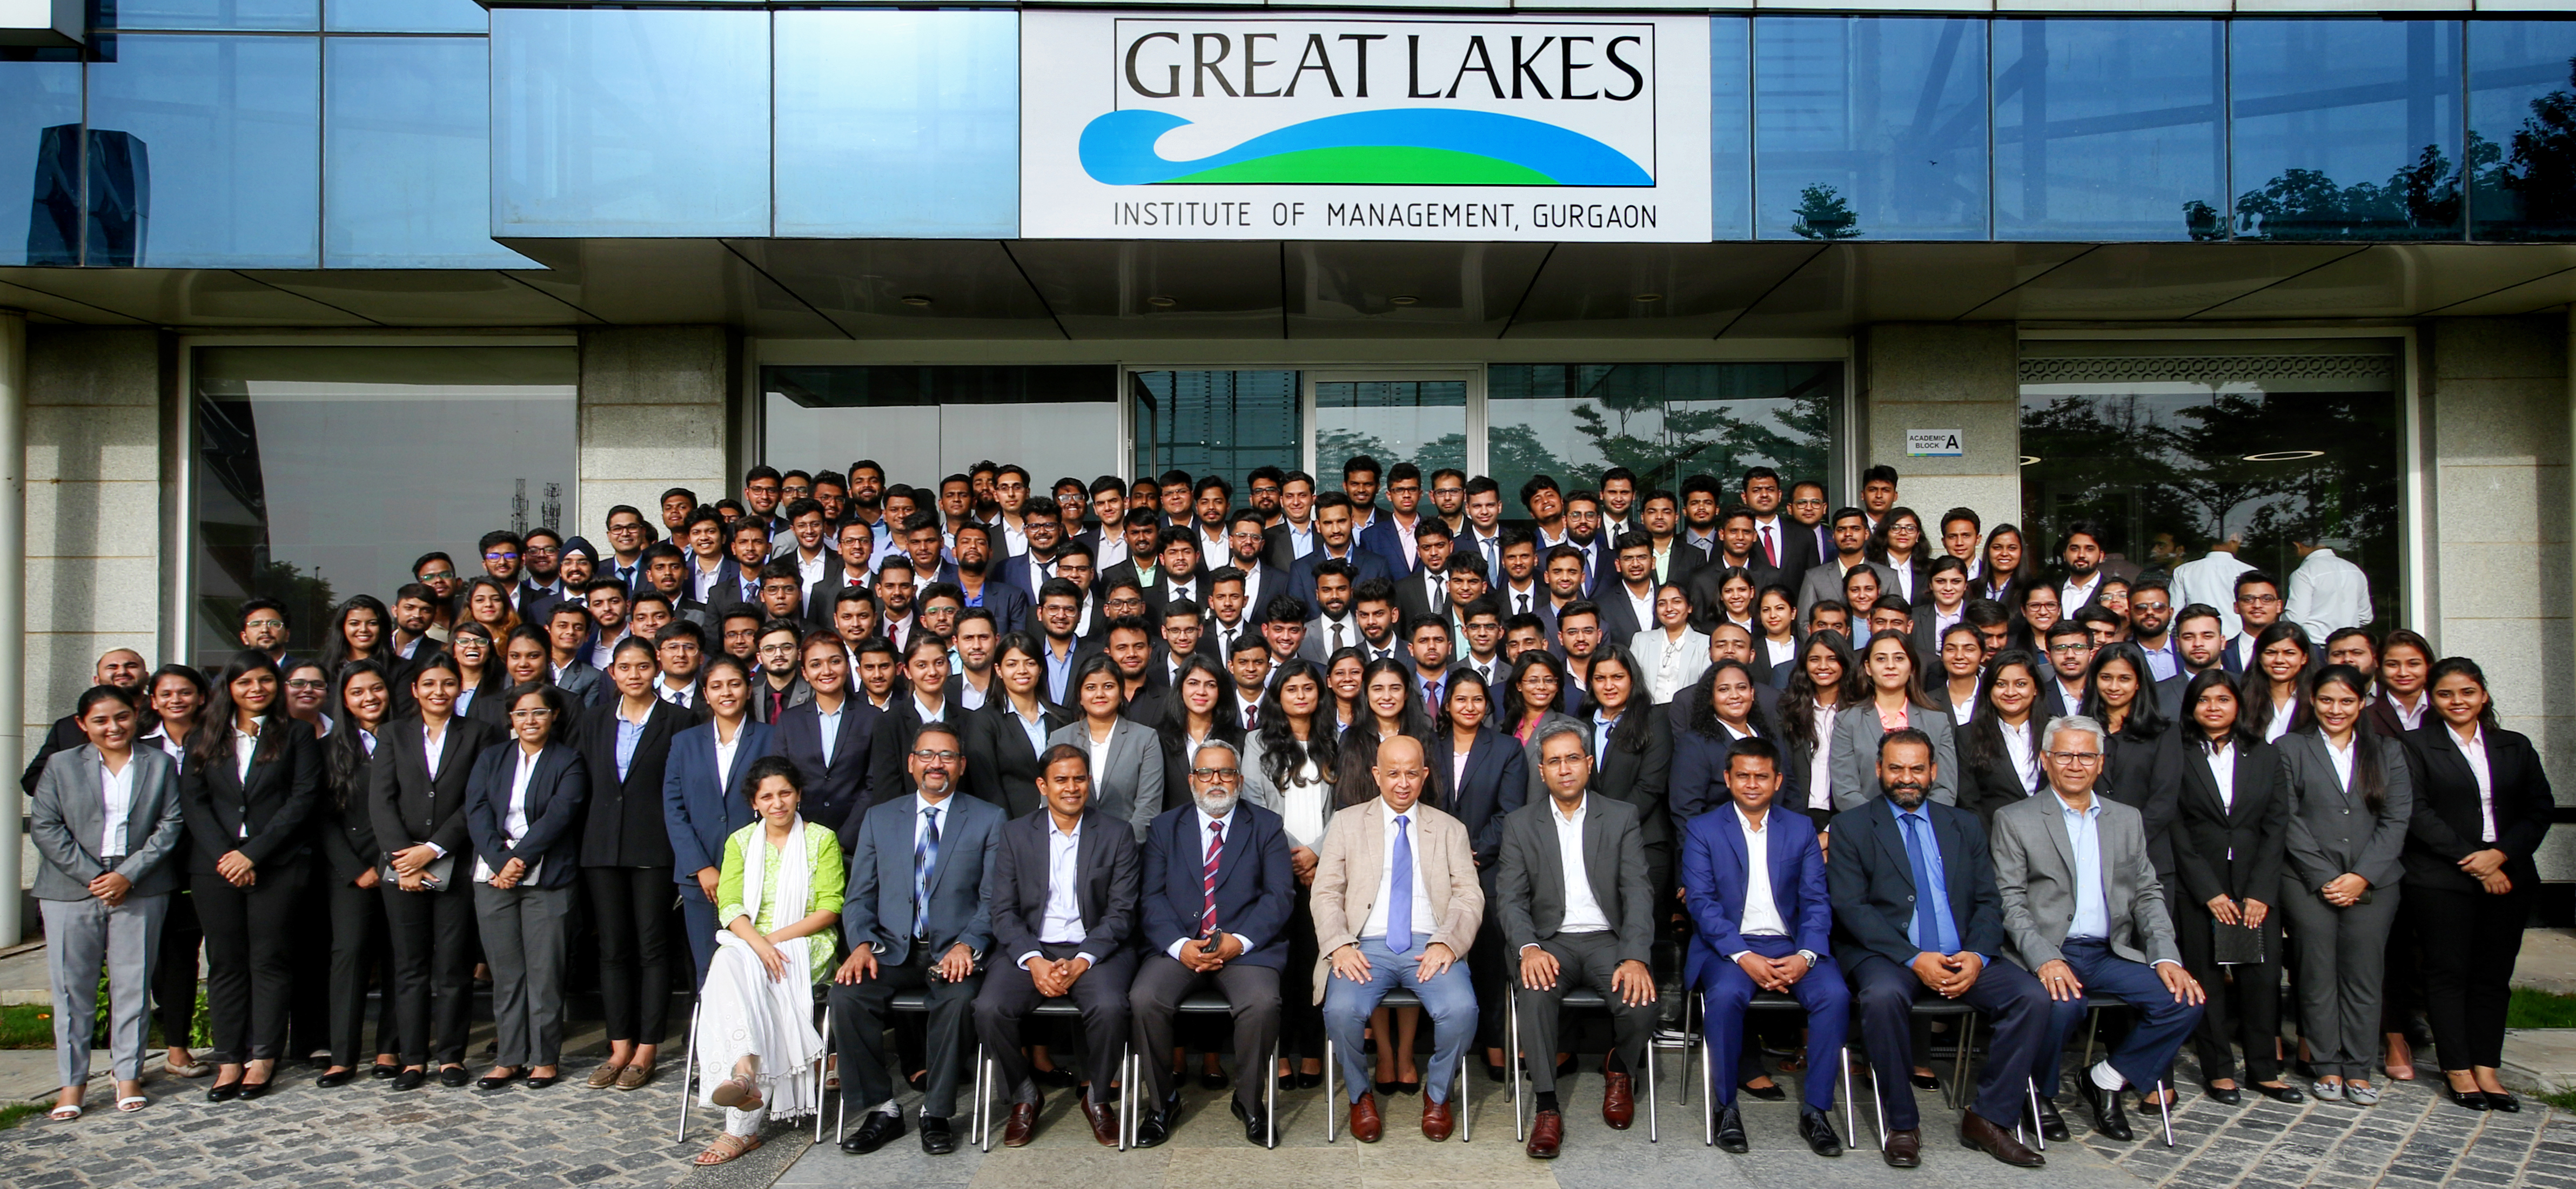 Great Lakes Institute of Management, Gurgaon, PGDM Batch of 2021